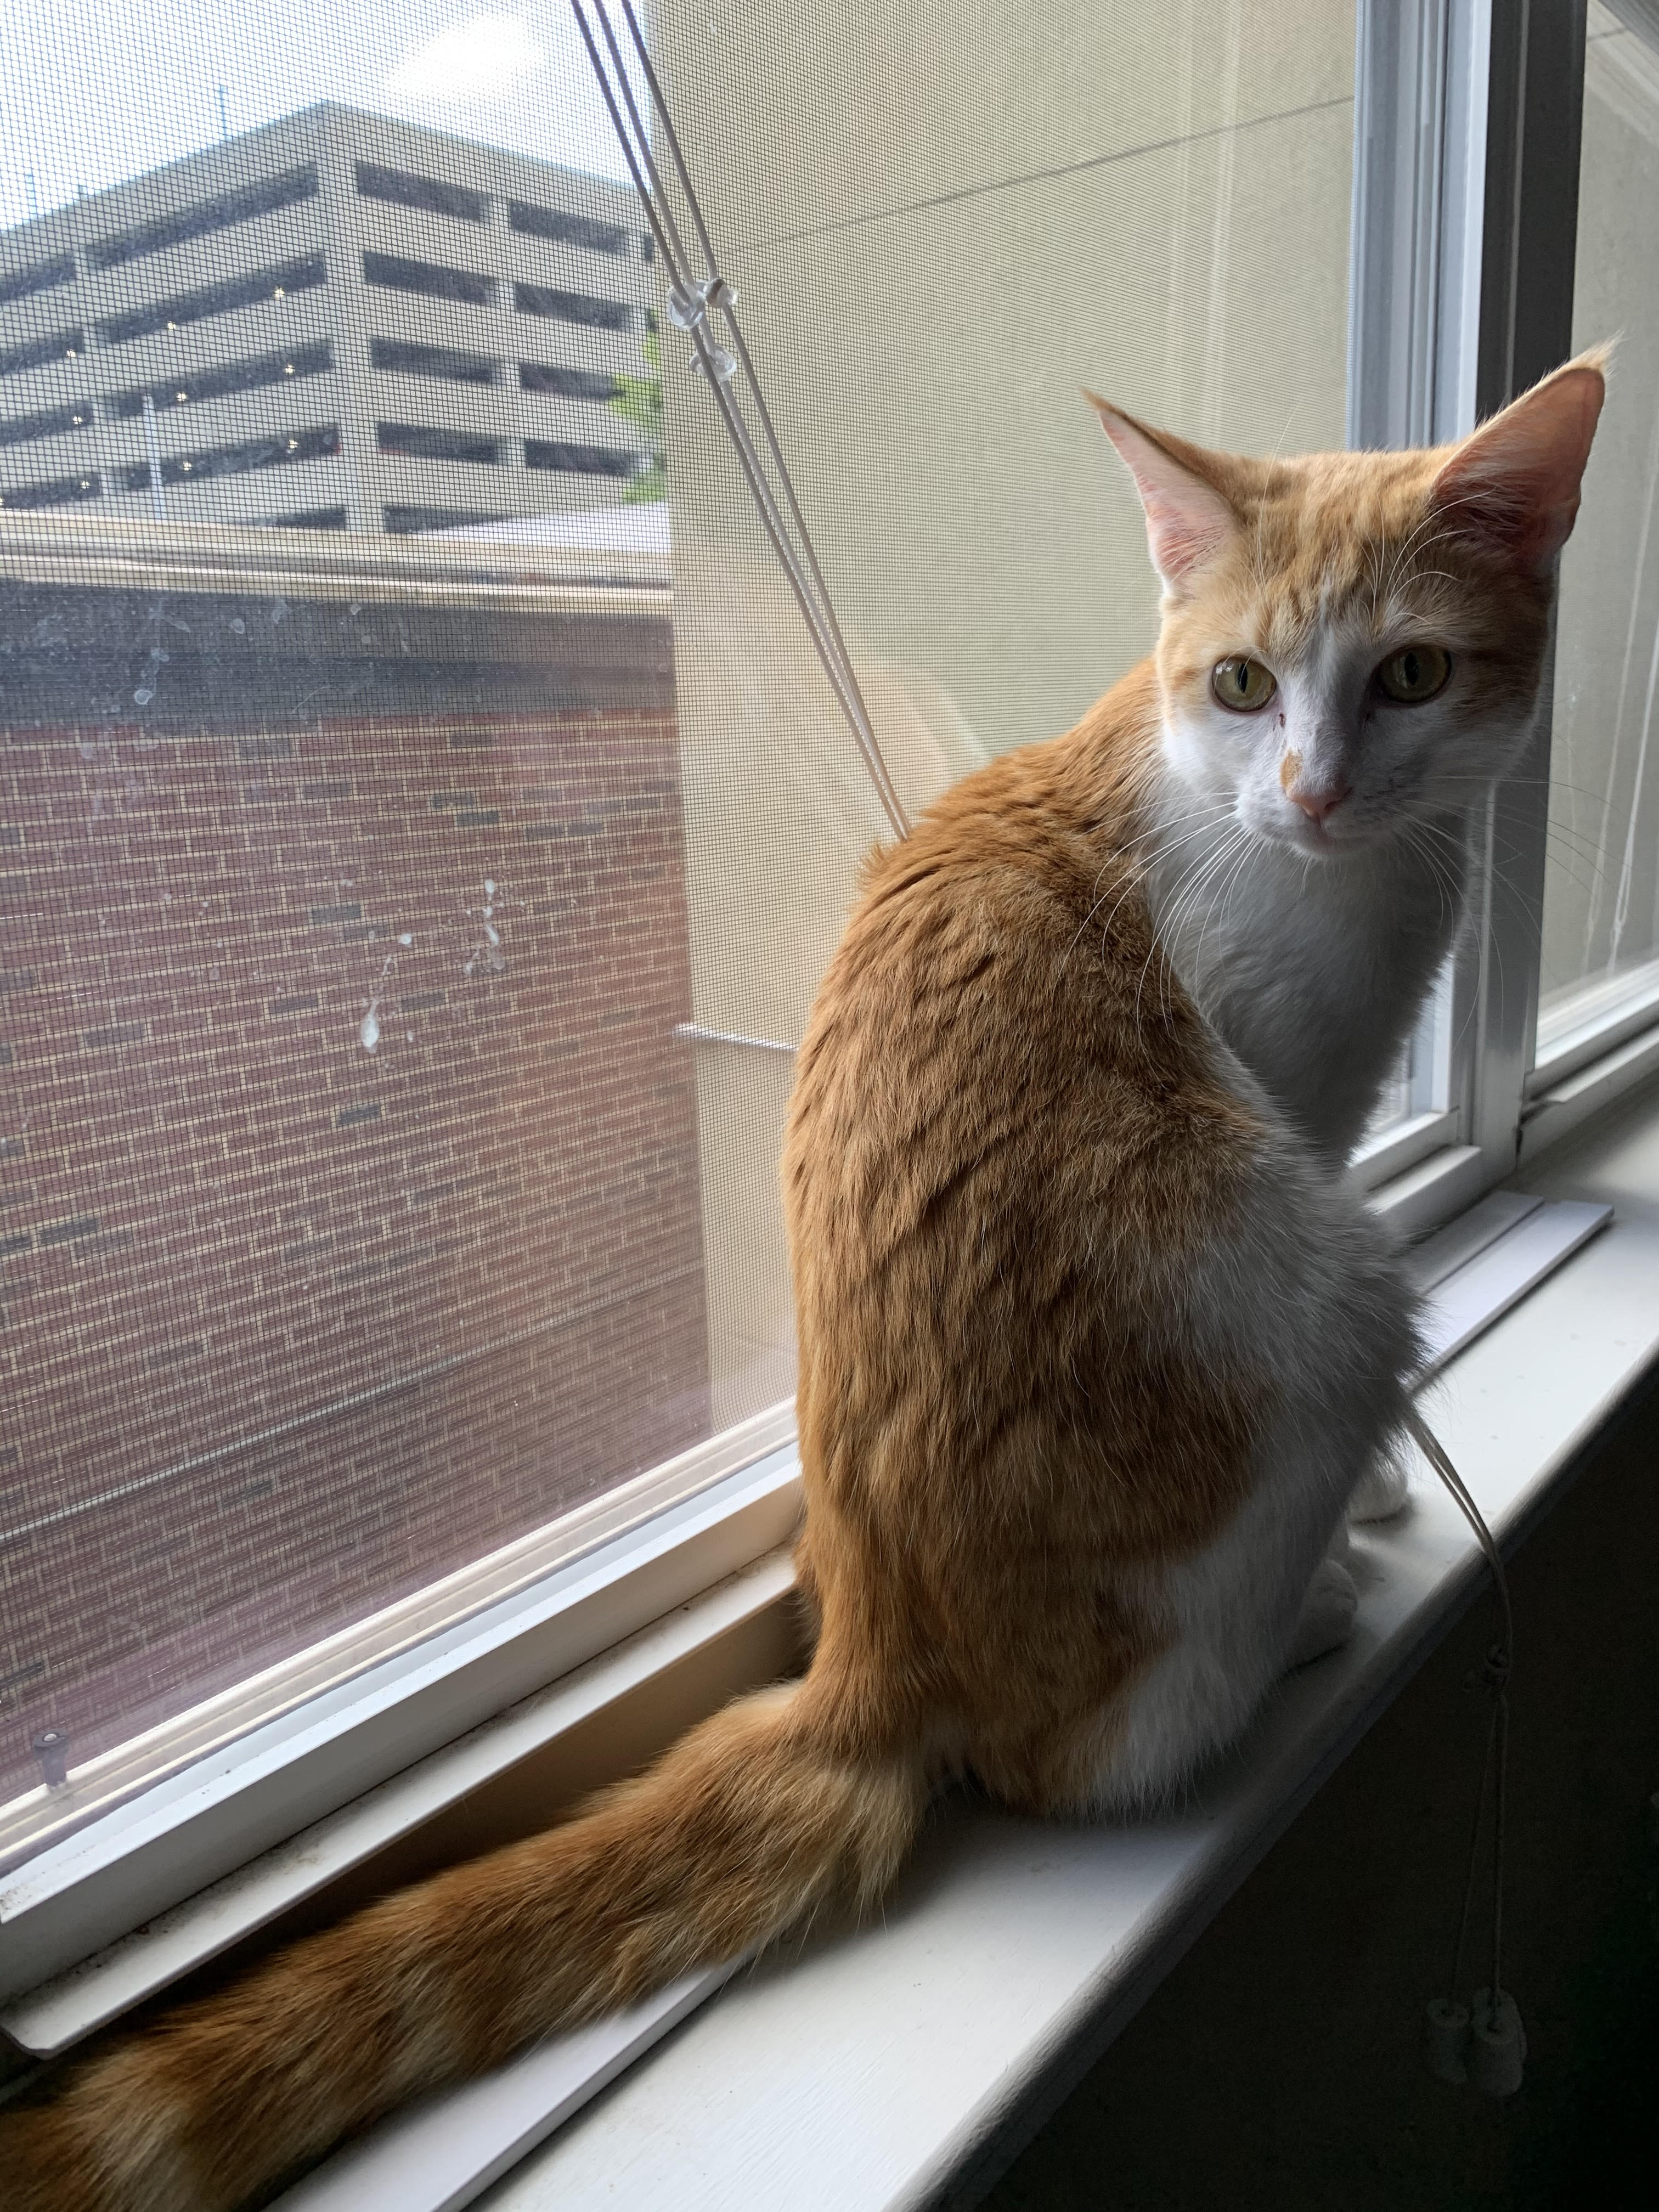 Magneto - a 3 year old orange cat on a window sill 